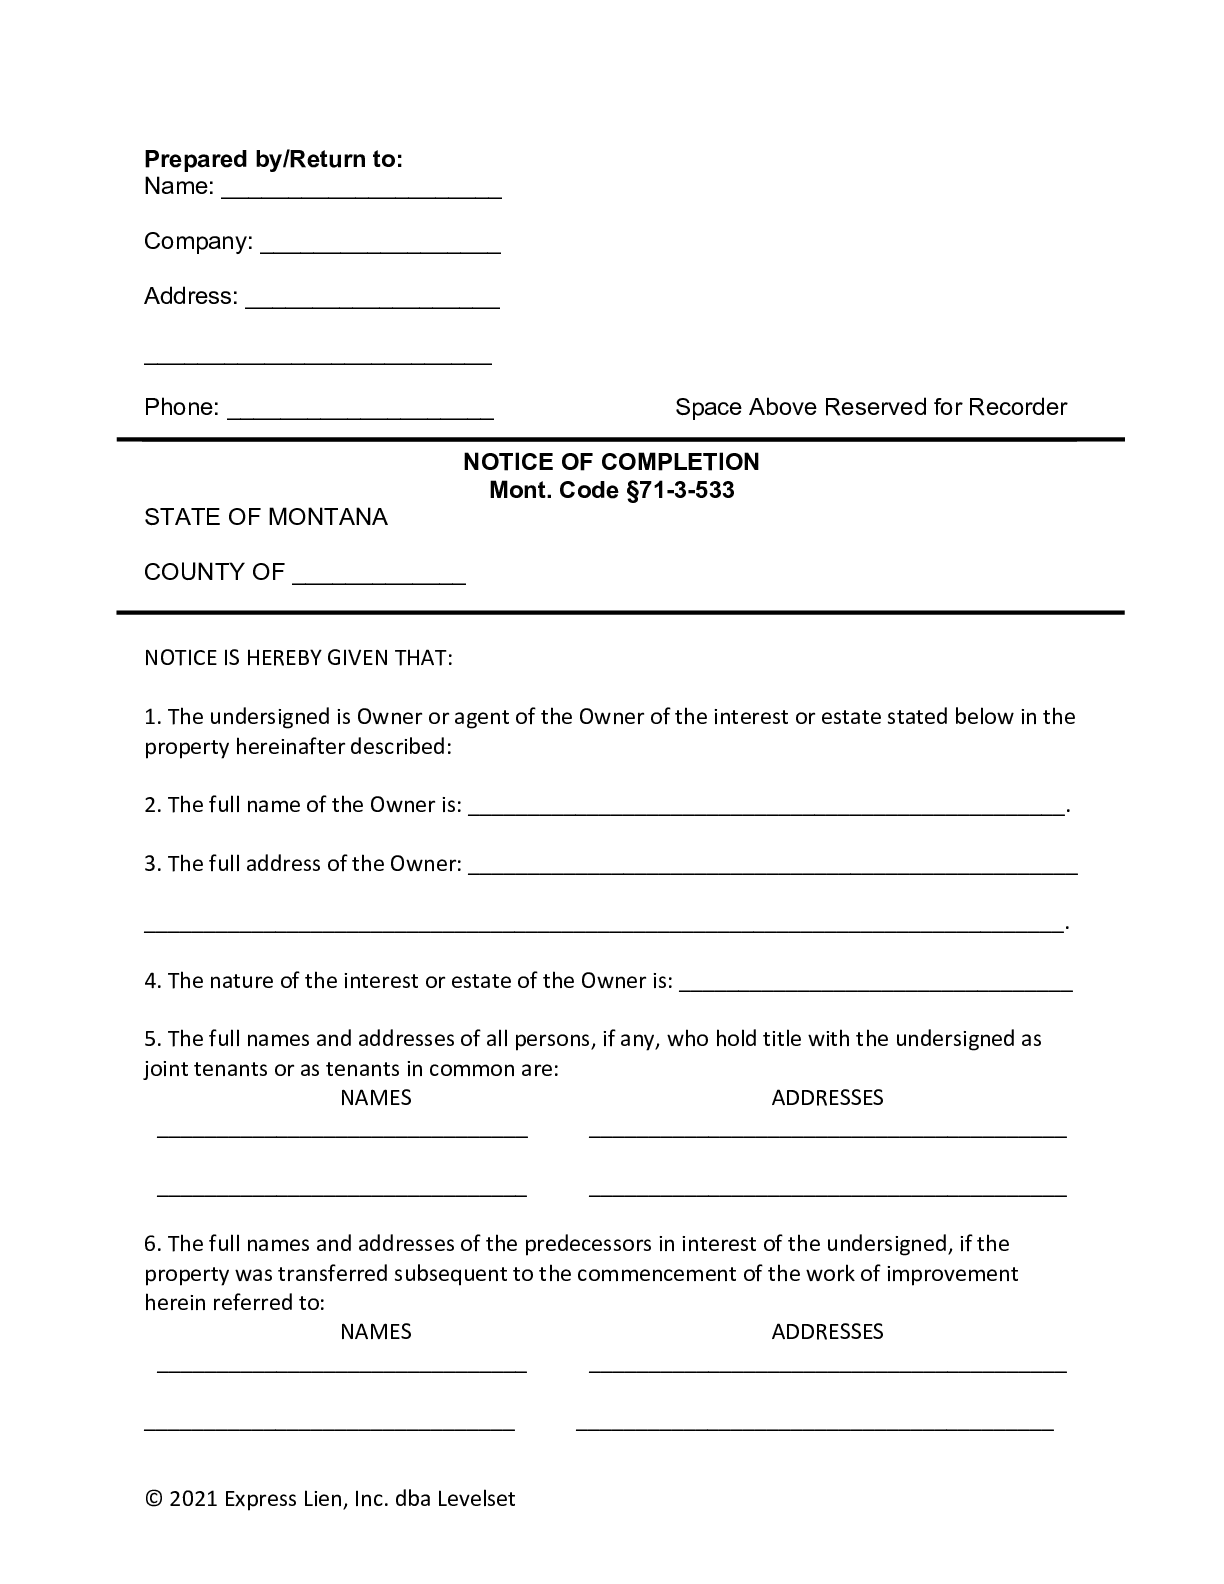 Montana Notice of Completion Form